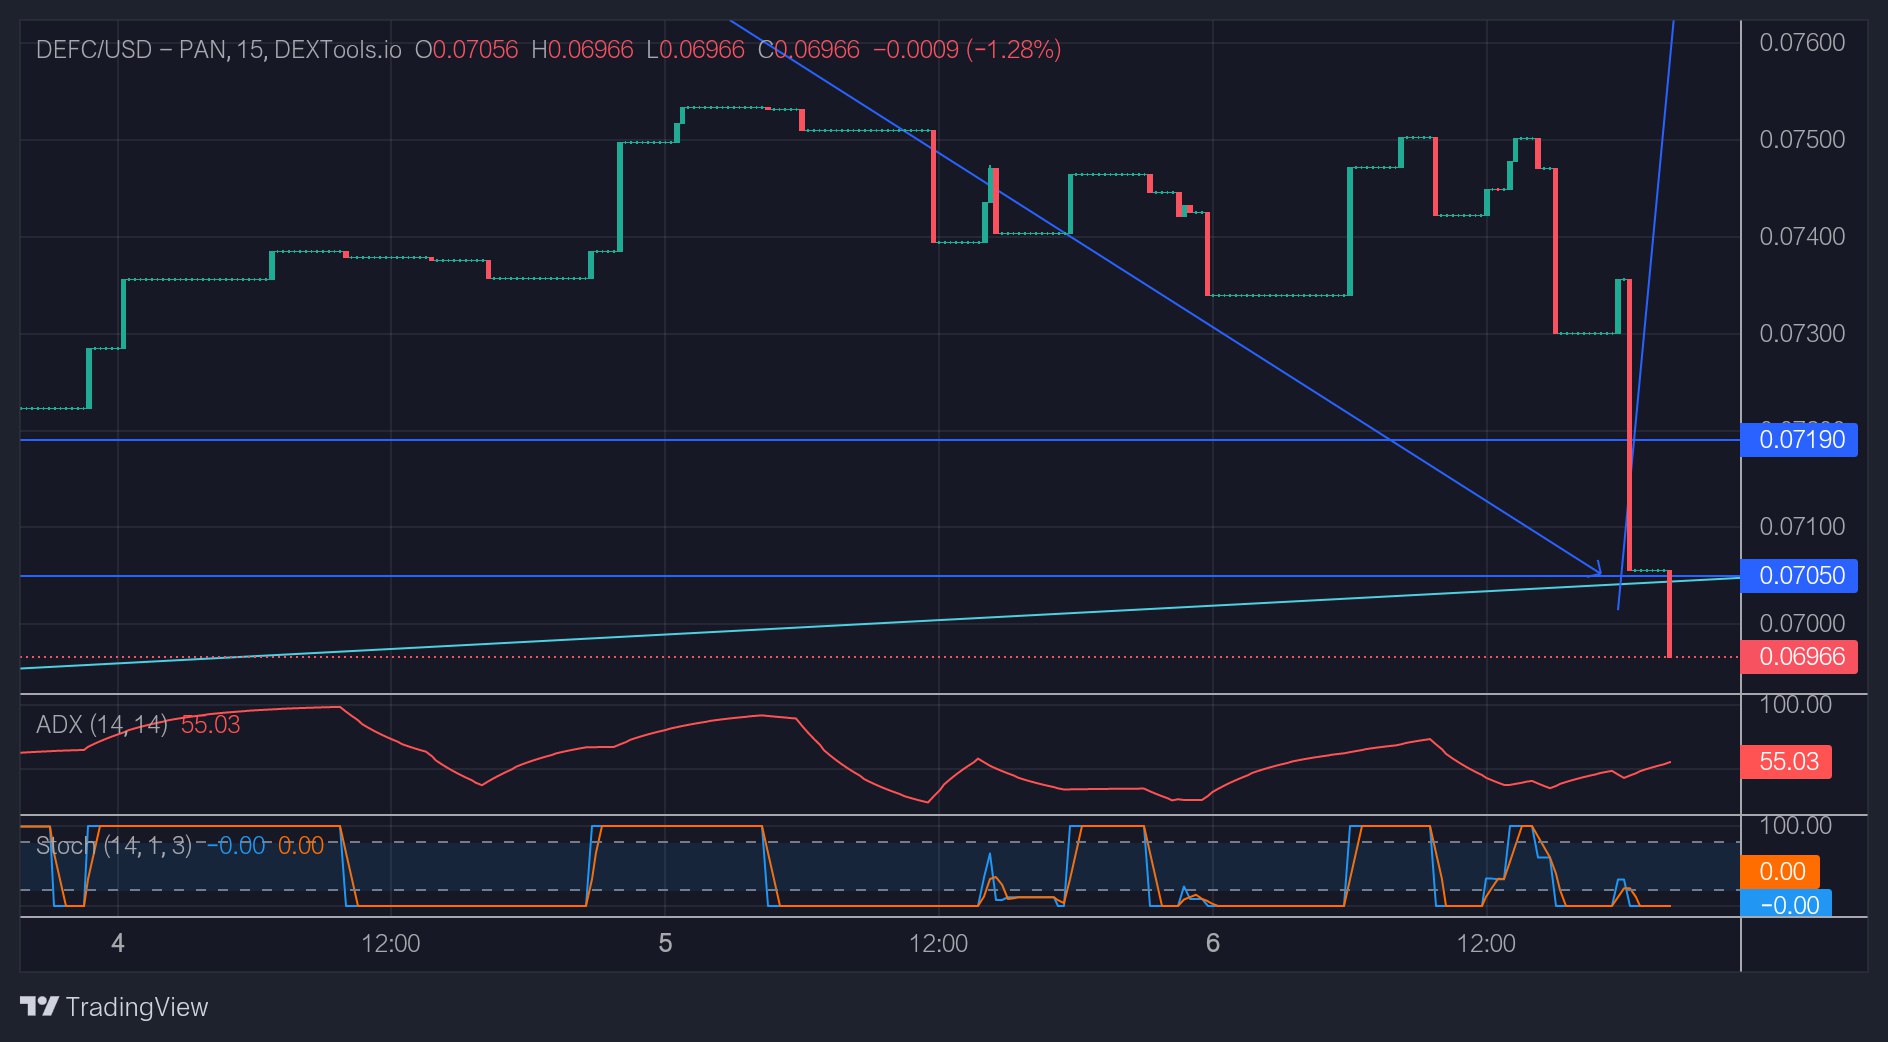 DeFI Coin Price Forecast: After a Long Retest, the DeFI Price is Set to Rise to $0.07800.